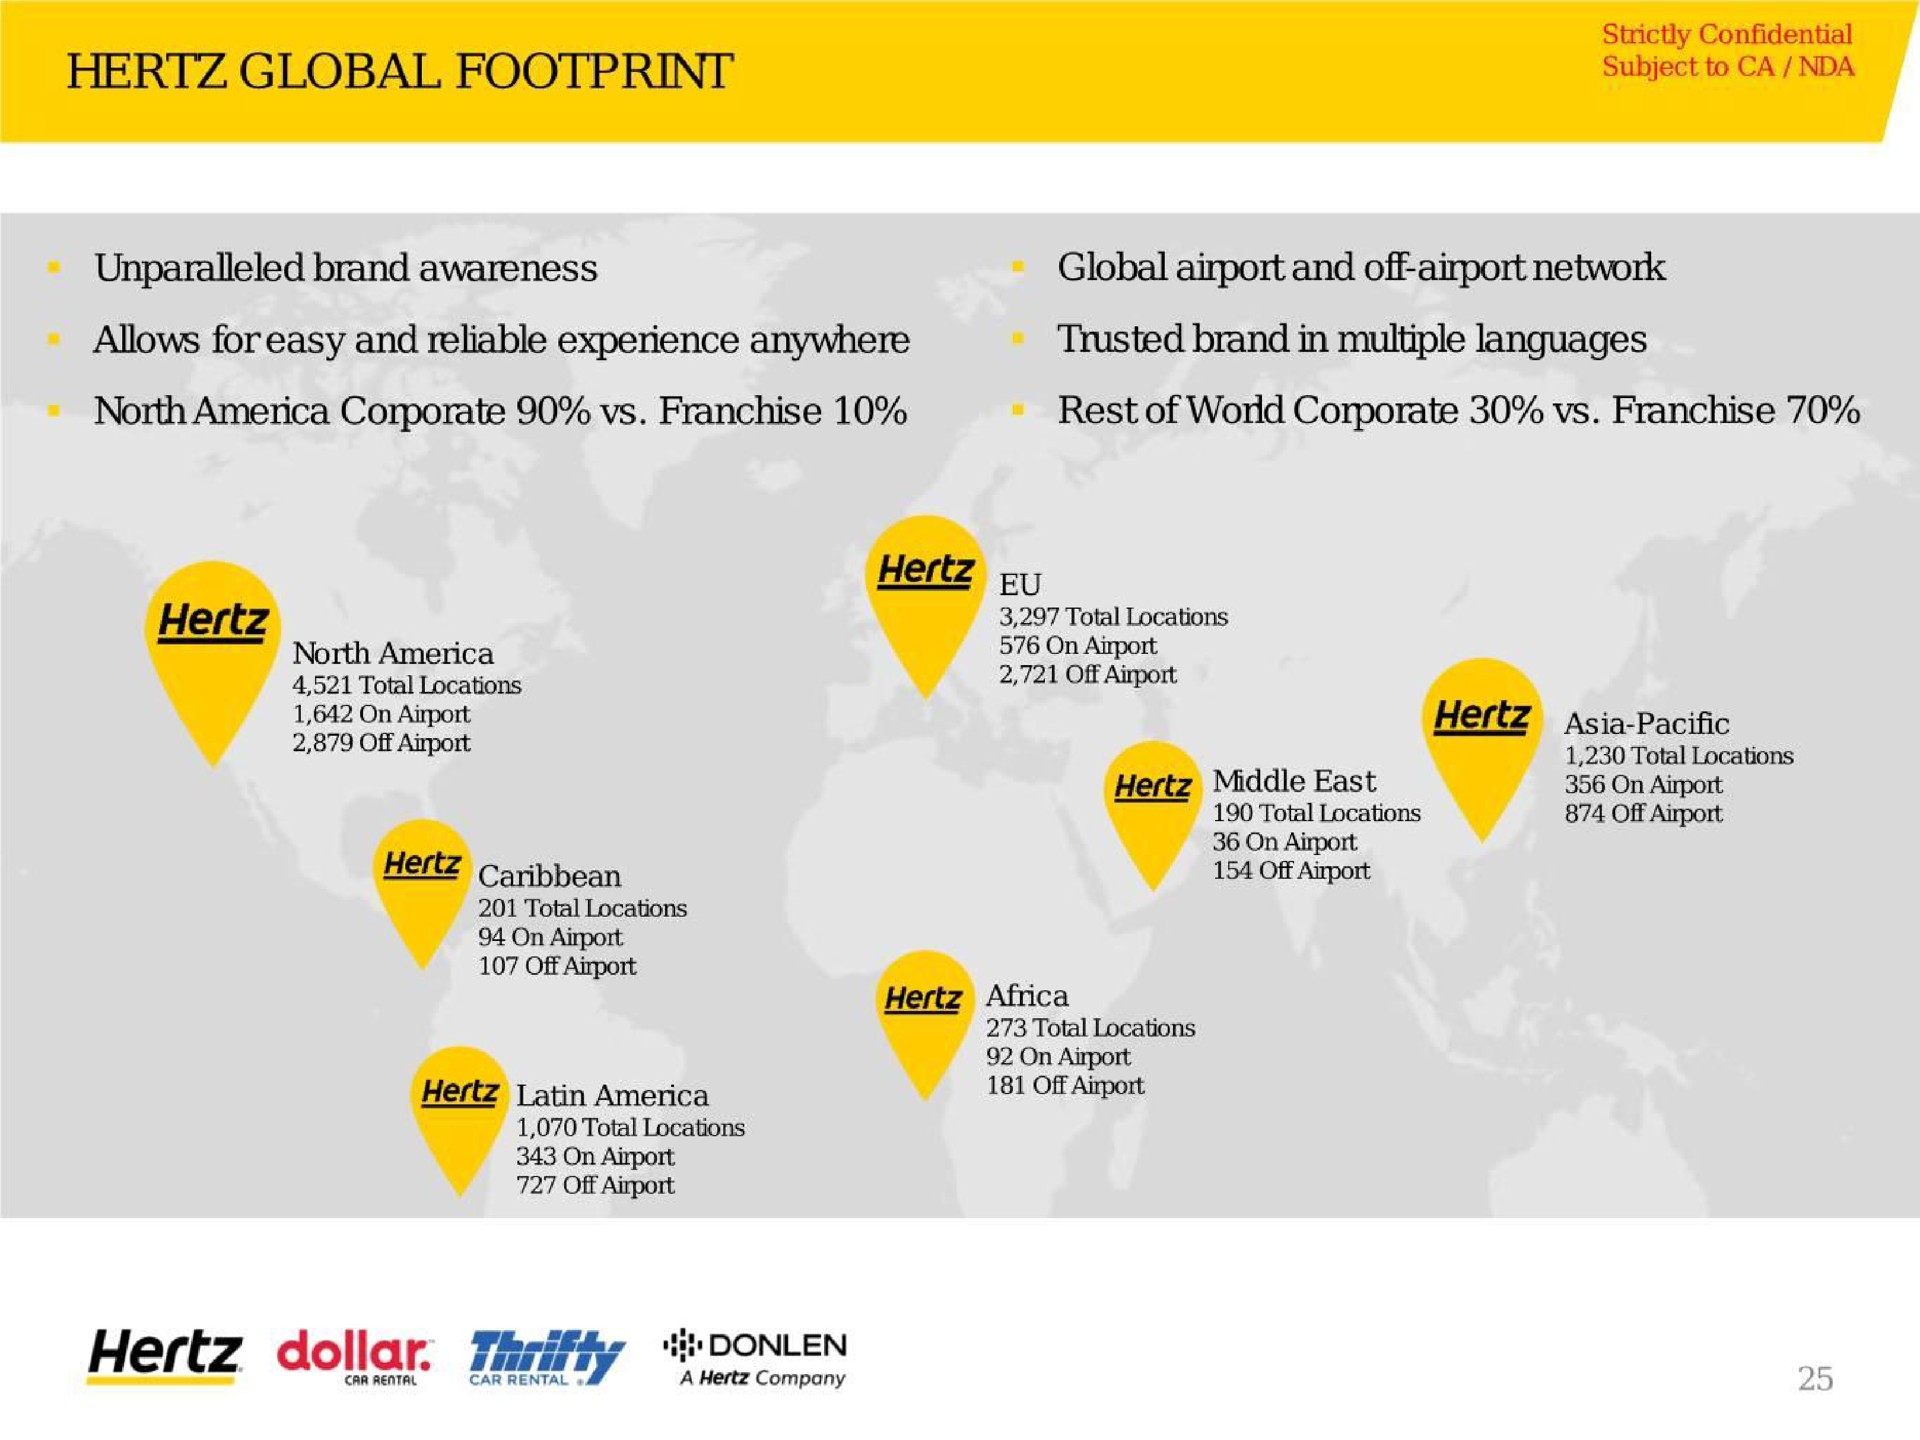 hertz global footprint subject to unparalleled brand awareness global airport and network allows for easy and reliable experience anywhere trusted brand in multiple languages north corporate franchise rest of world corporate franchise pee on hertz pacific hertz dollar | Hertz